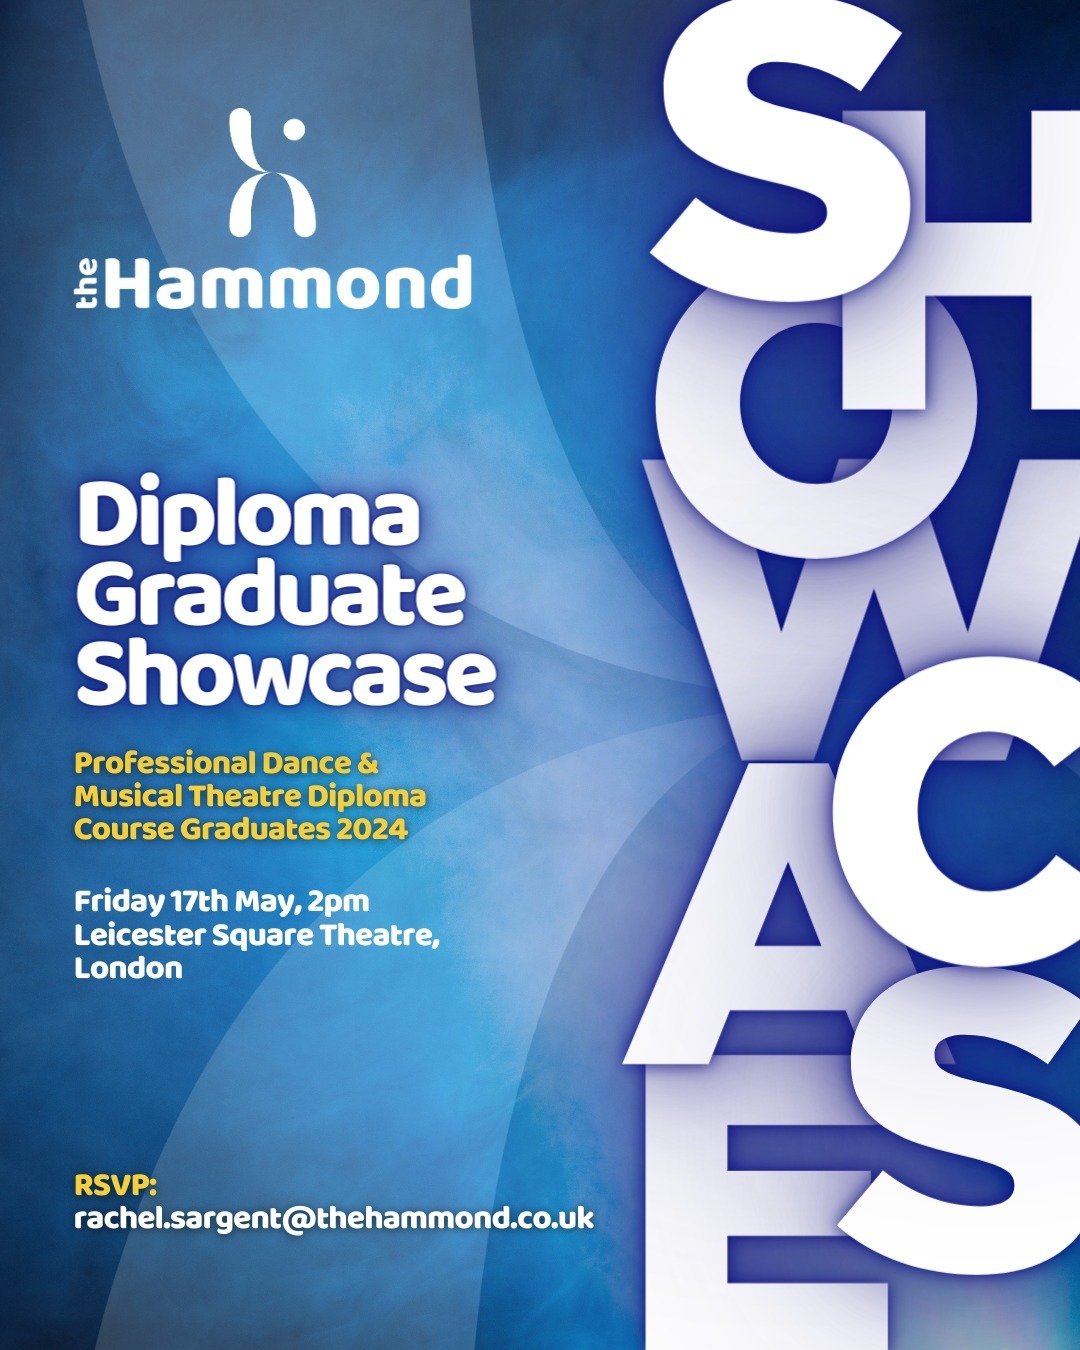 Diploma Graduate Showcase 2024 ⤵⁠
⁠
Featuring The Hammond's Professional Dance and Professional Musical Theatre course graduating years. ⁠
⁠
Friday 17th May, 2pm⁠
Leicester Square Theatre,⁠
London⁠
⁠
If you&rsquo;re an Agent, Casting Director or Crea